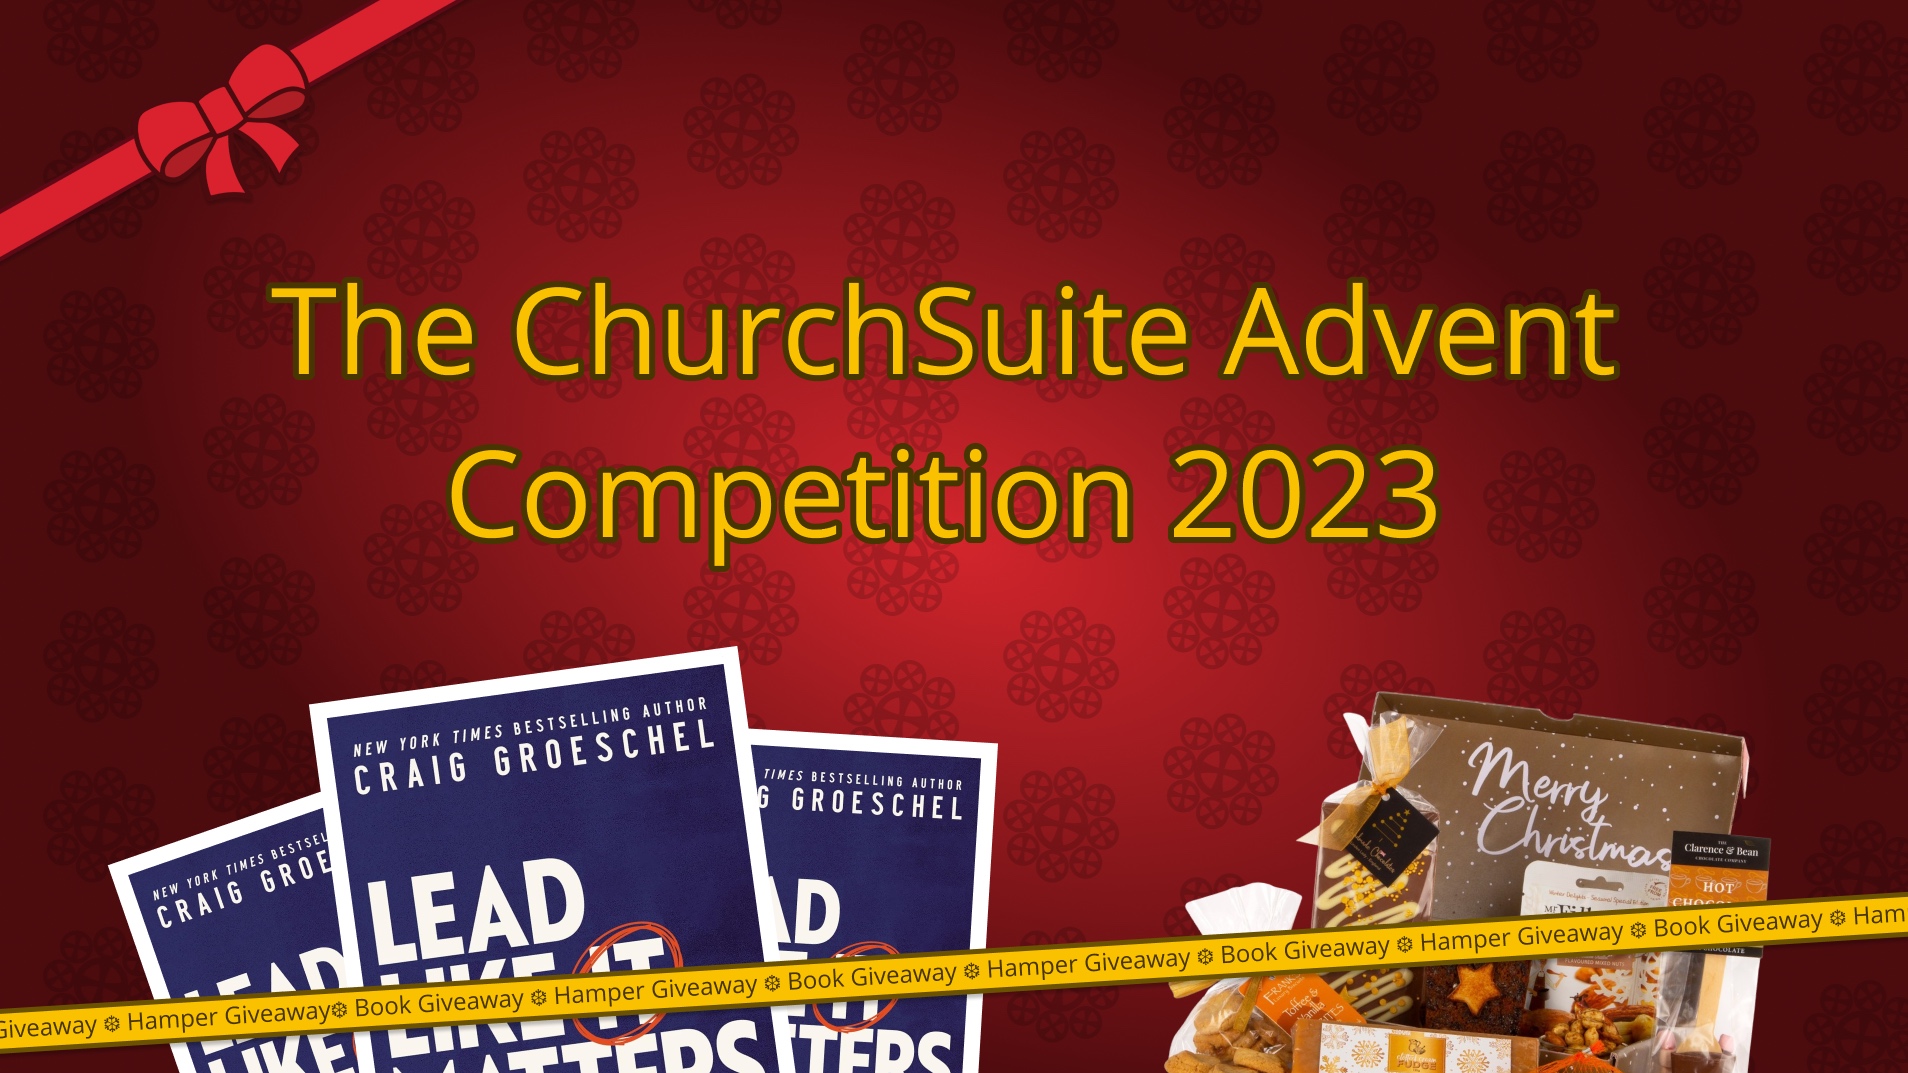 The ChurchSuite Advent Competition